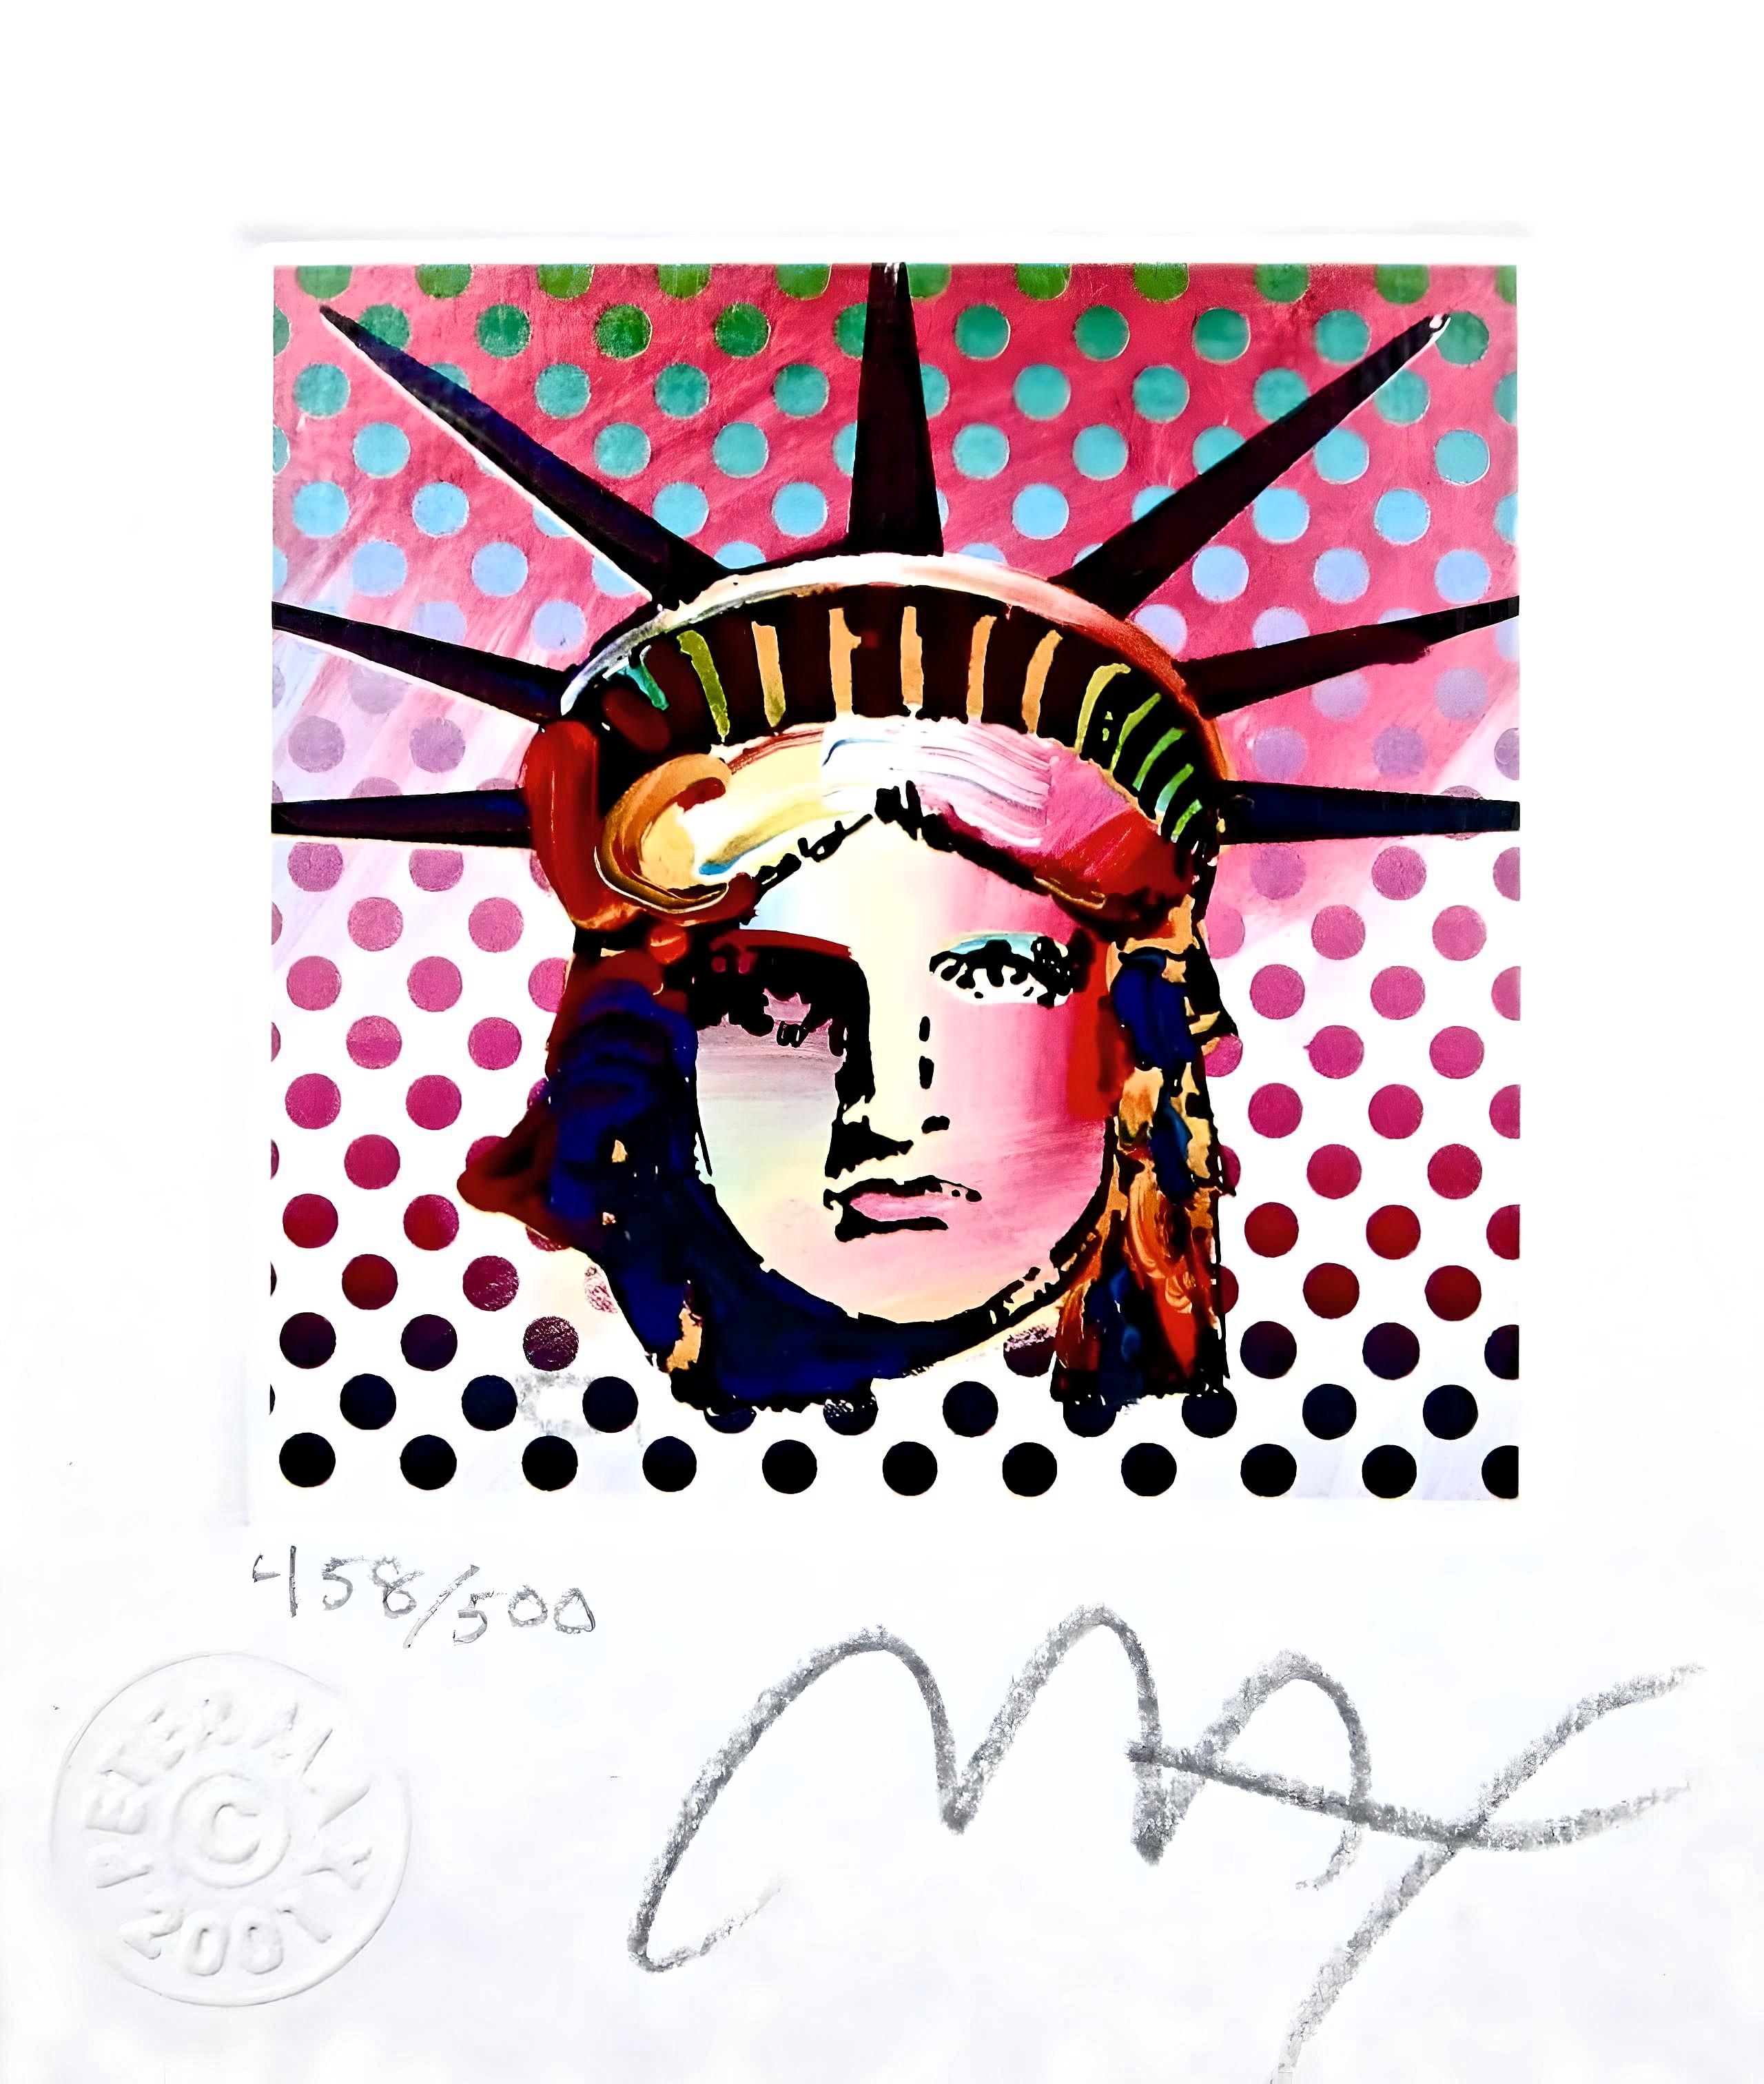 Artist: Peter Max (1937)
Title: Liberty Head II
Year: 2001
Edition: 458/500, plus proofs
Medium: Lithograph on Lustro Saxony paper
Size: 3.5 x 3 inches
Condition: Excellent
Inscription: Signed and numbered by the artist.
Notes: Published by Via